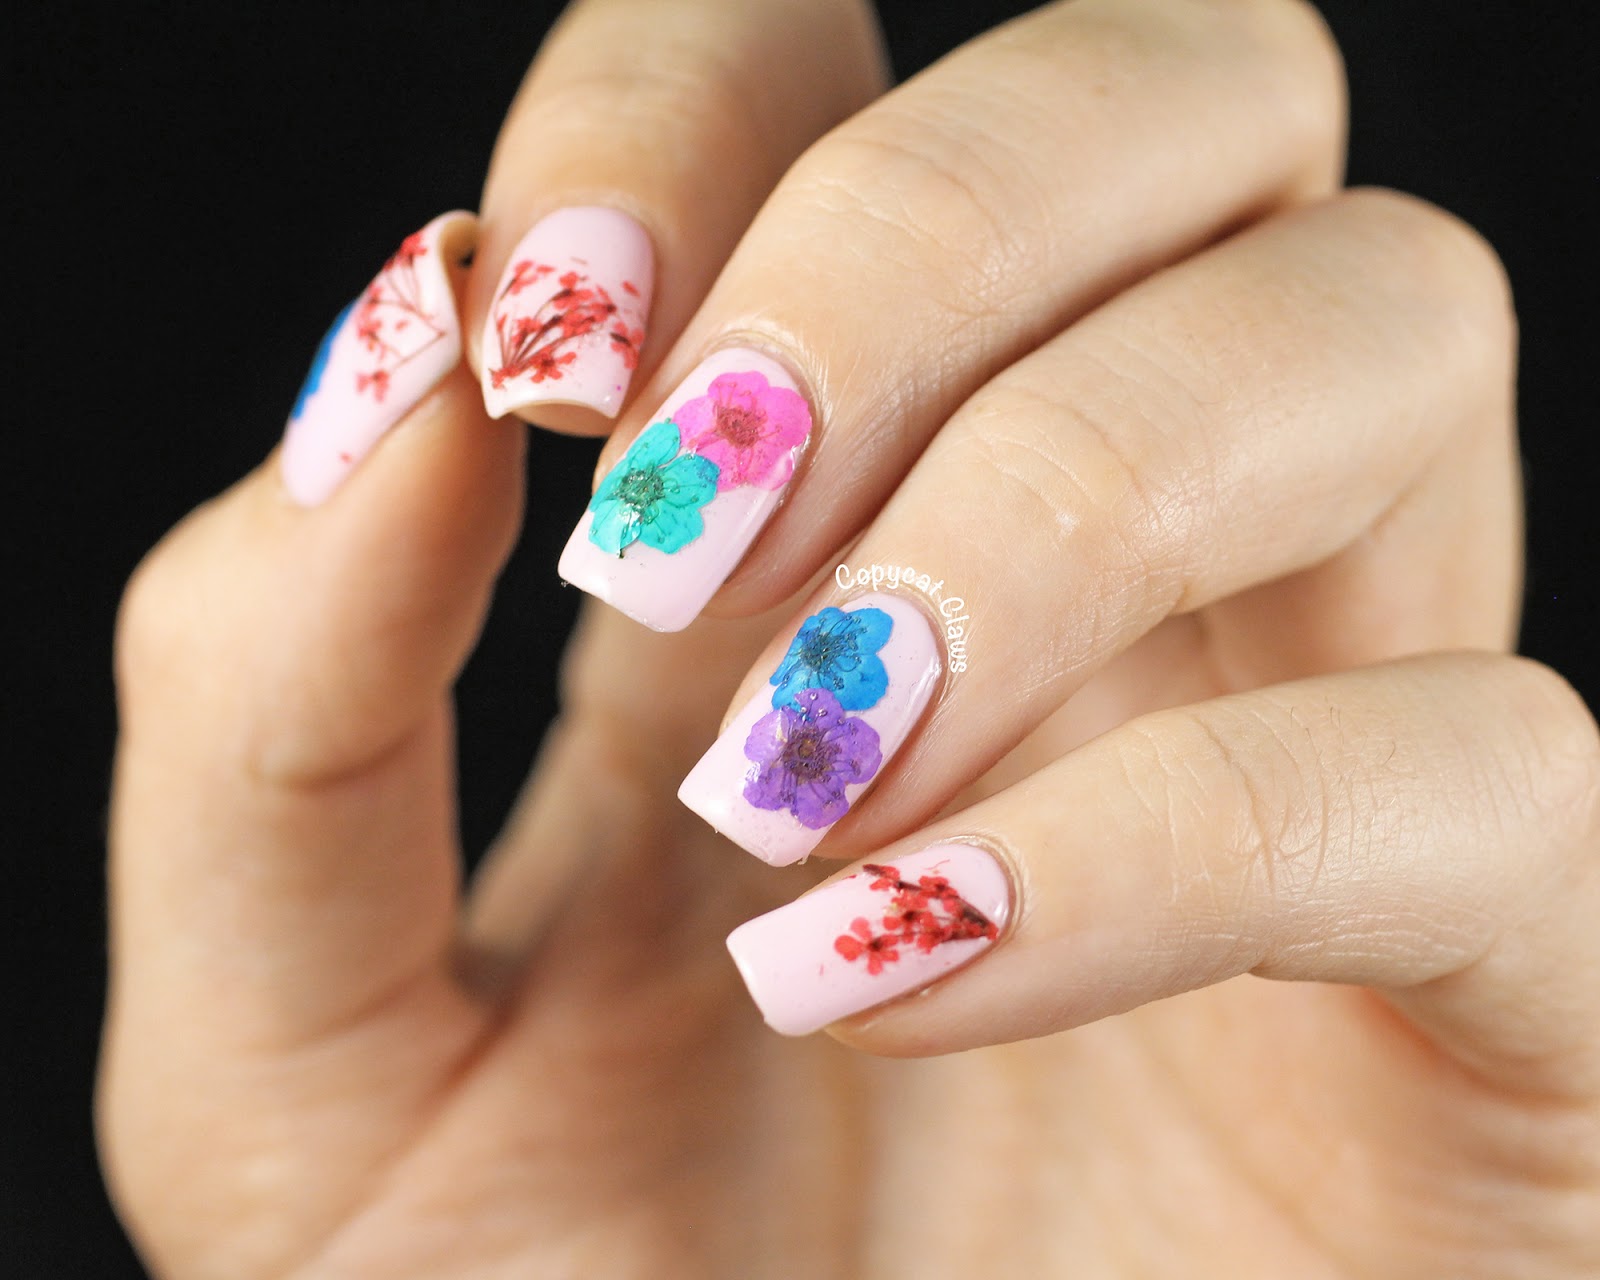 3. Festive Poinsettia Nail Art Design with Dried Flowers - wide 8